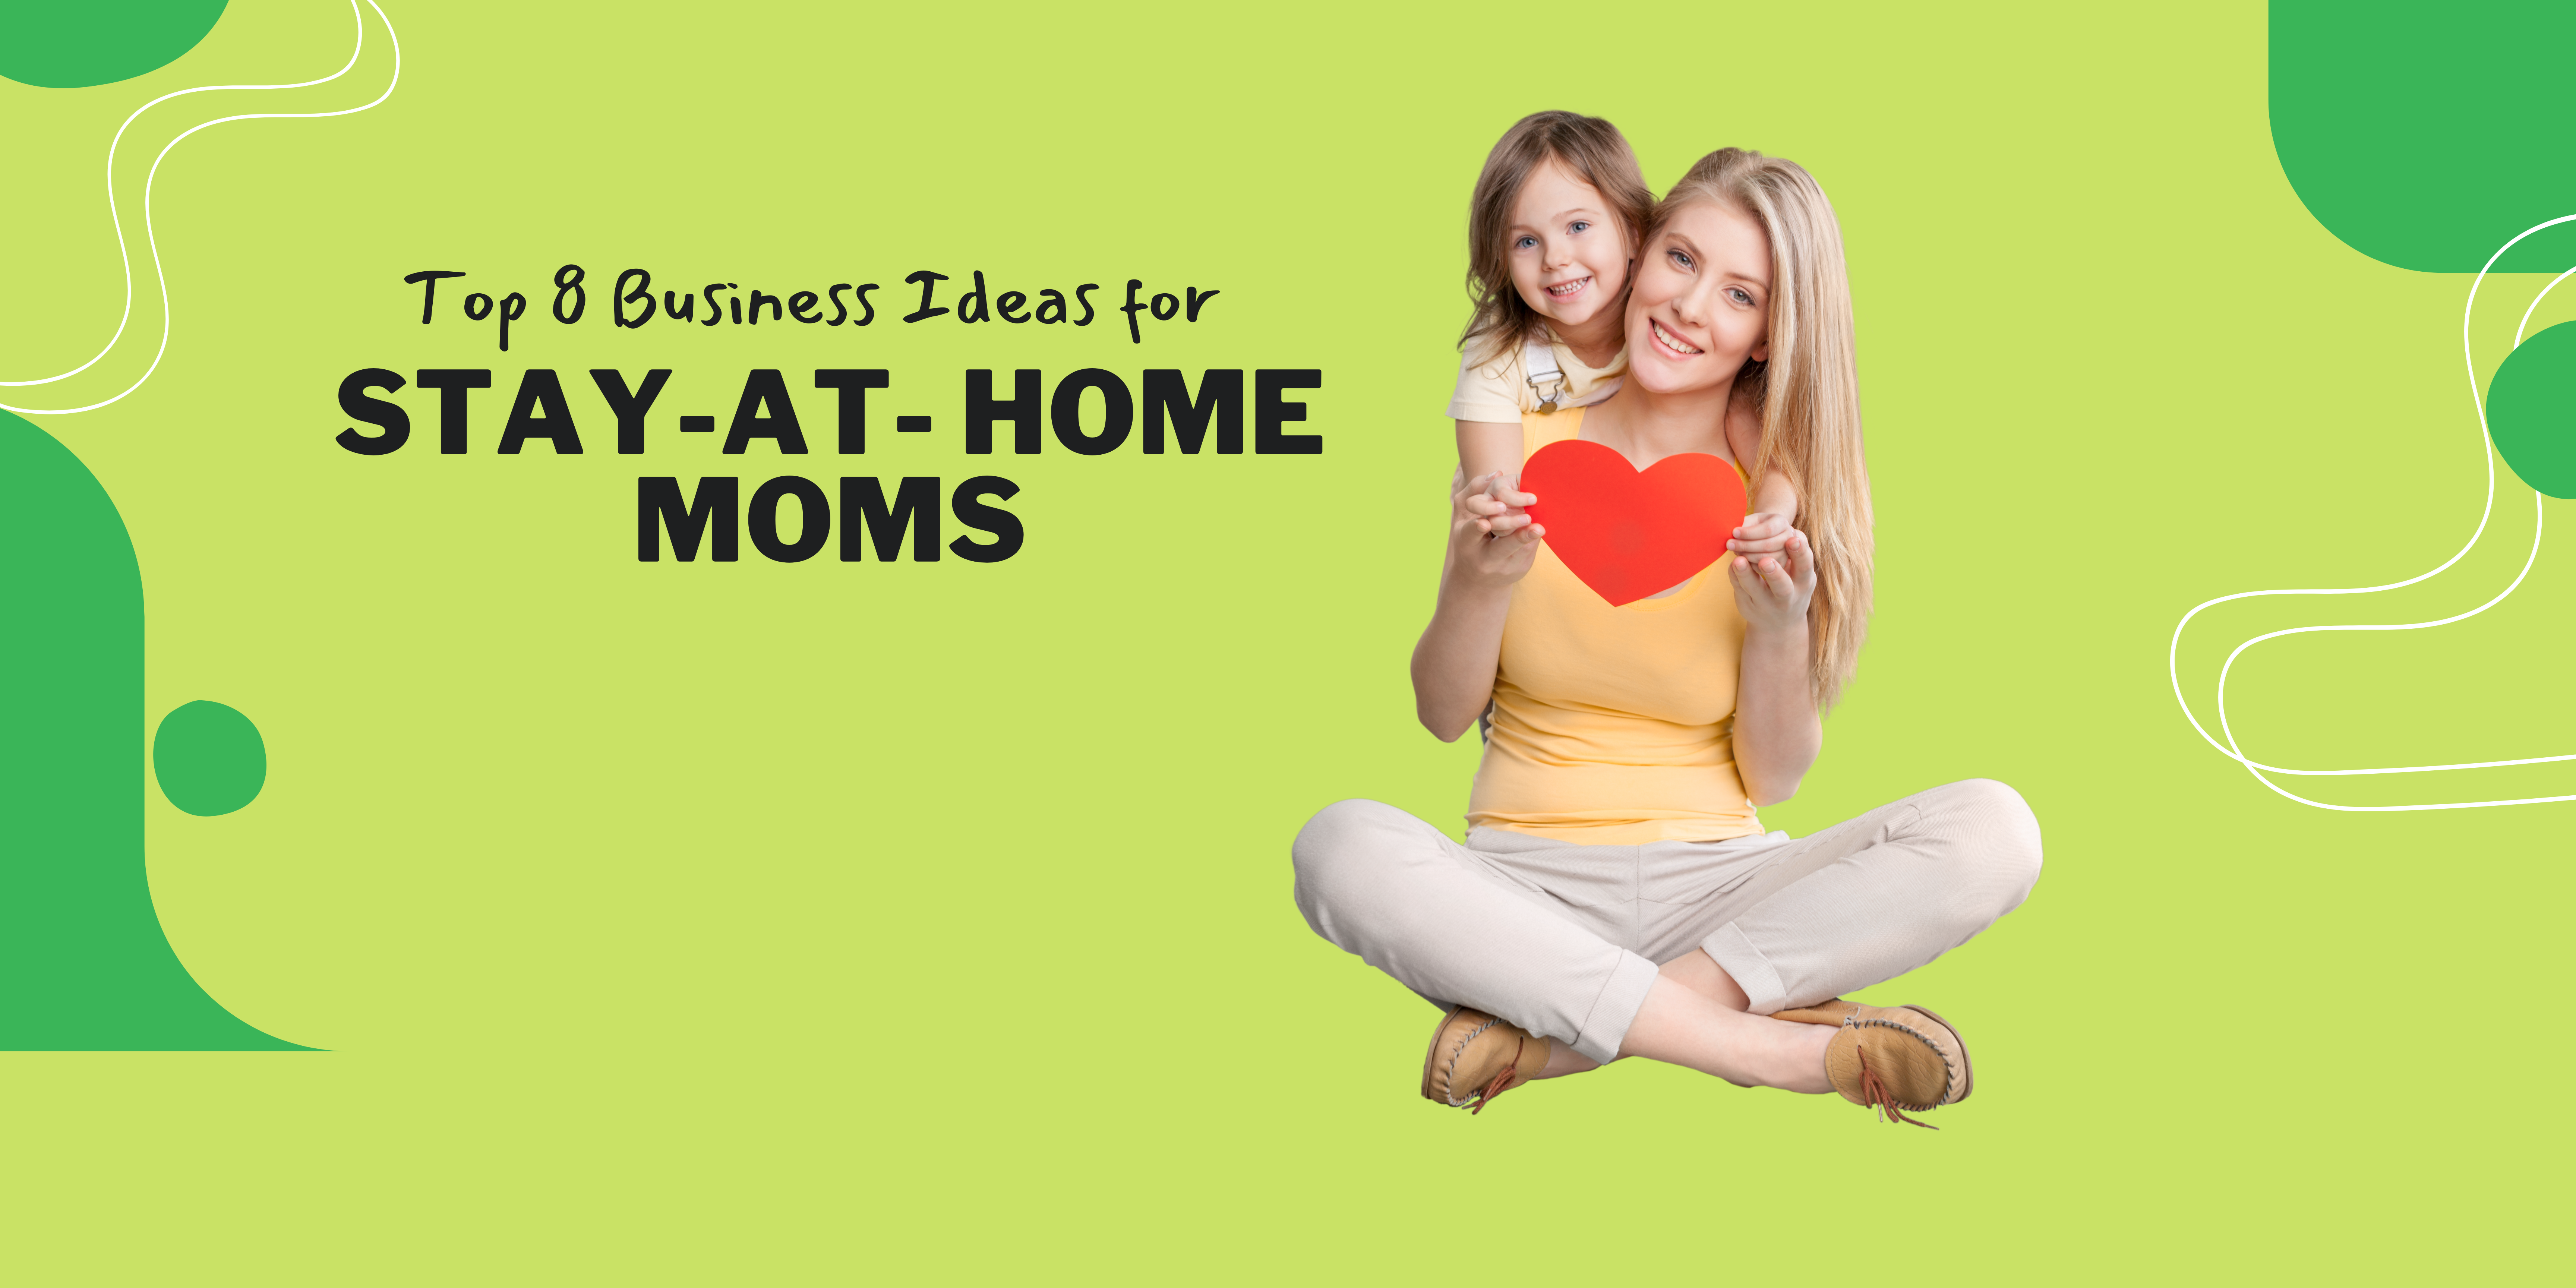 Top 8 Business Ideas for Stay-at-Home Moms Banner -diarynigracia